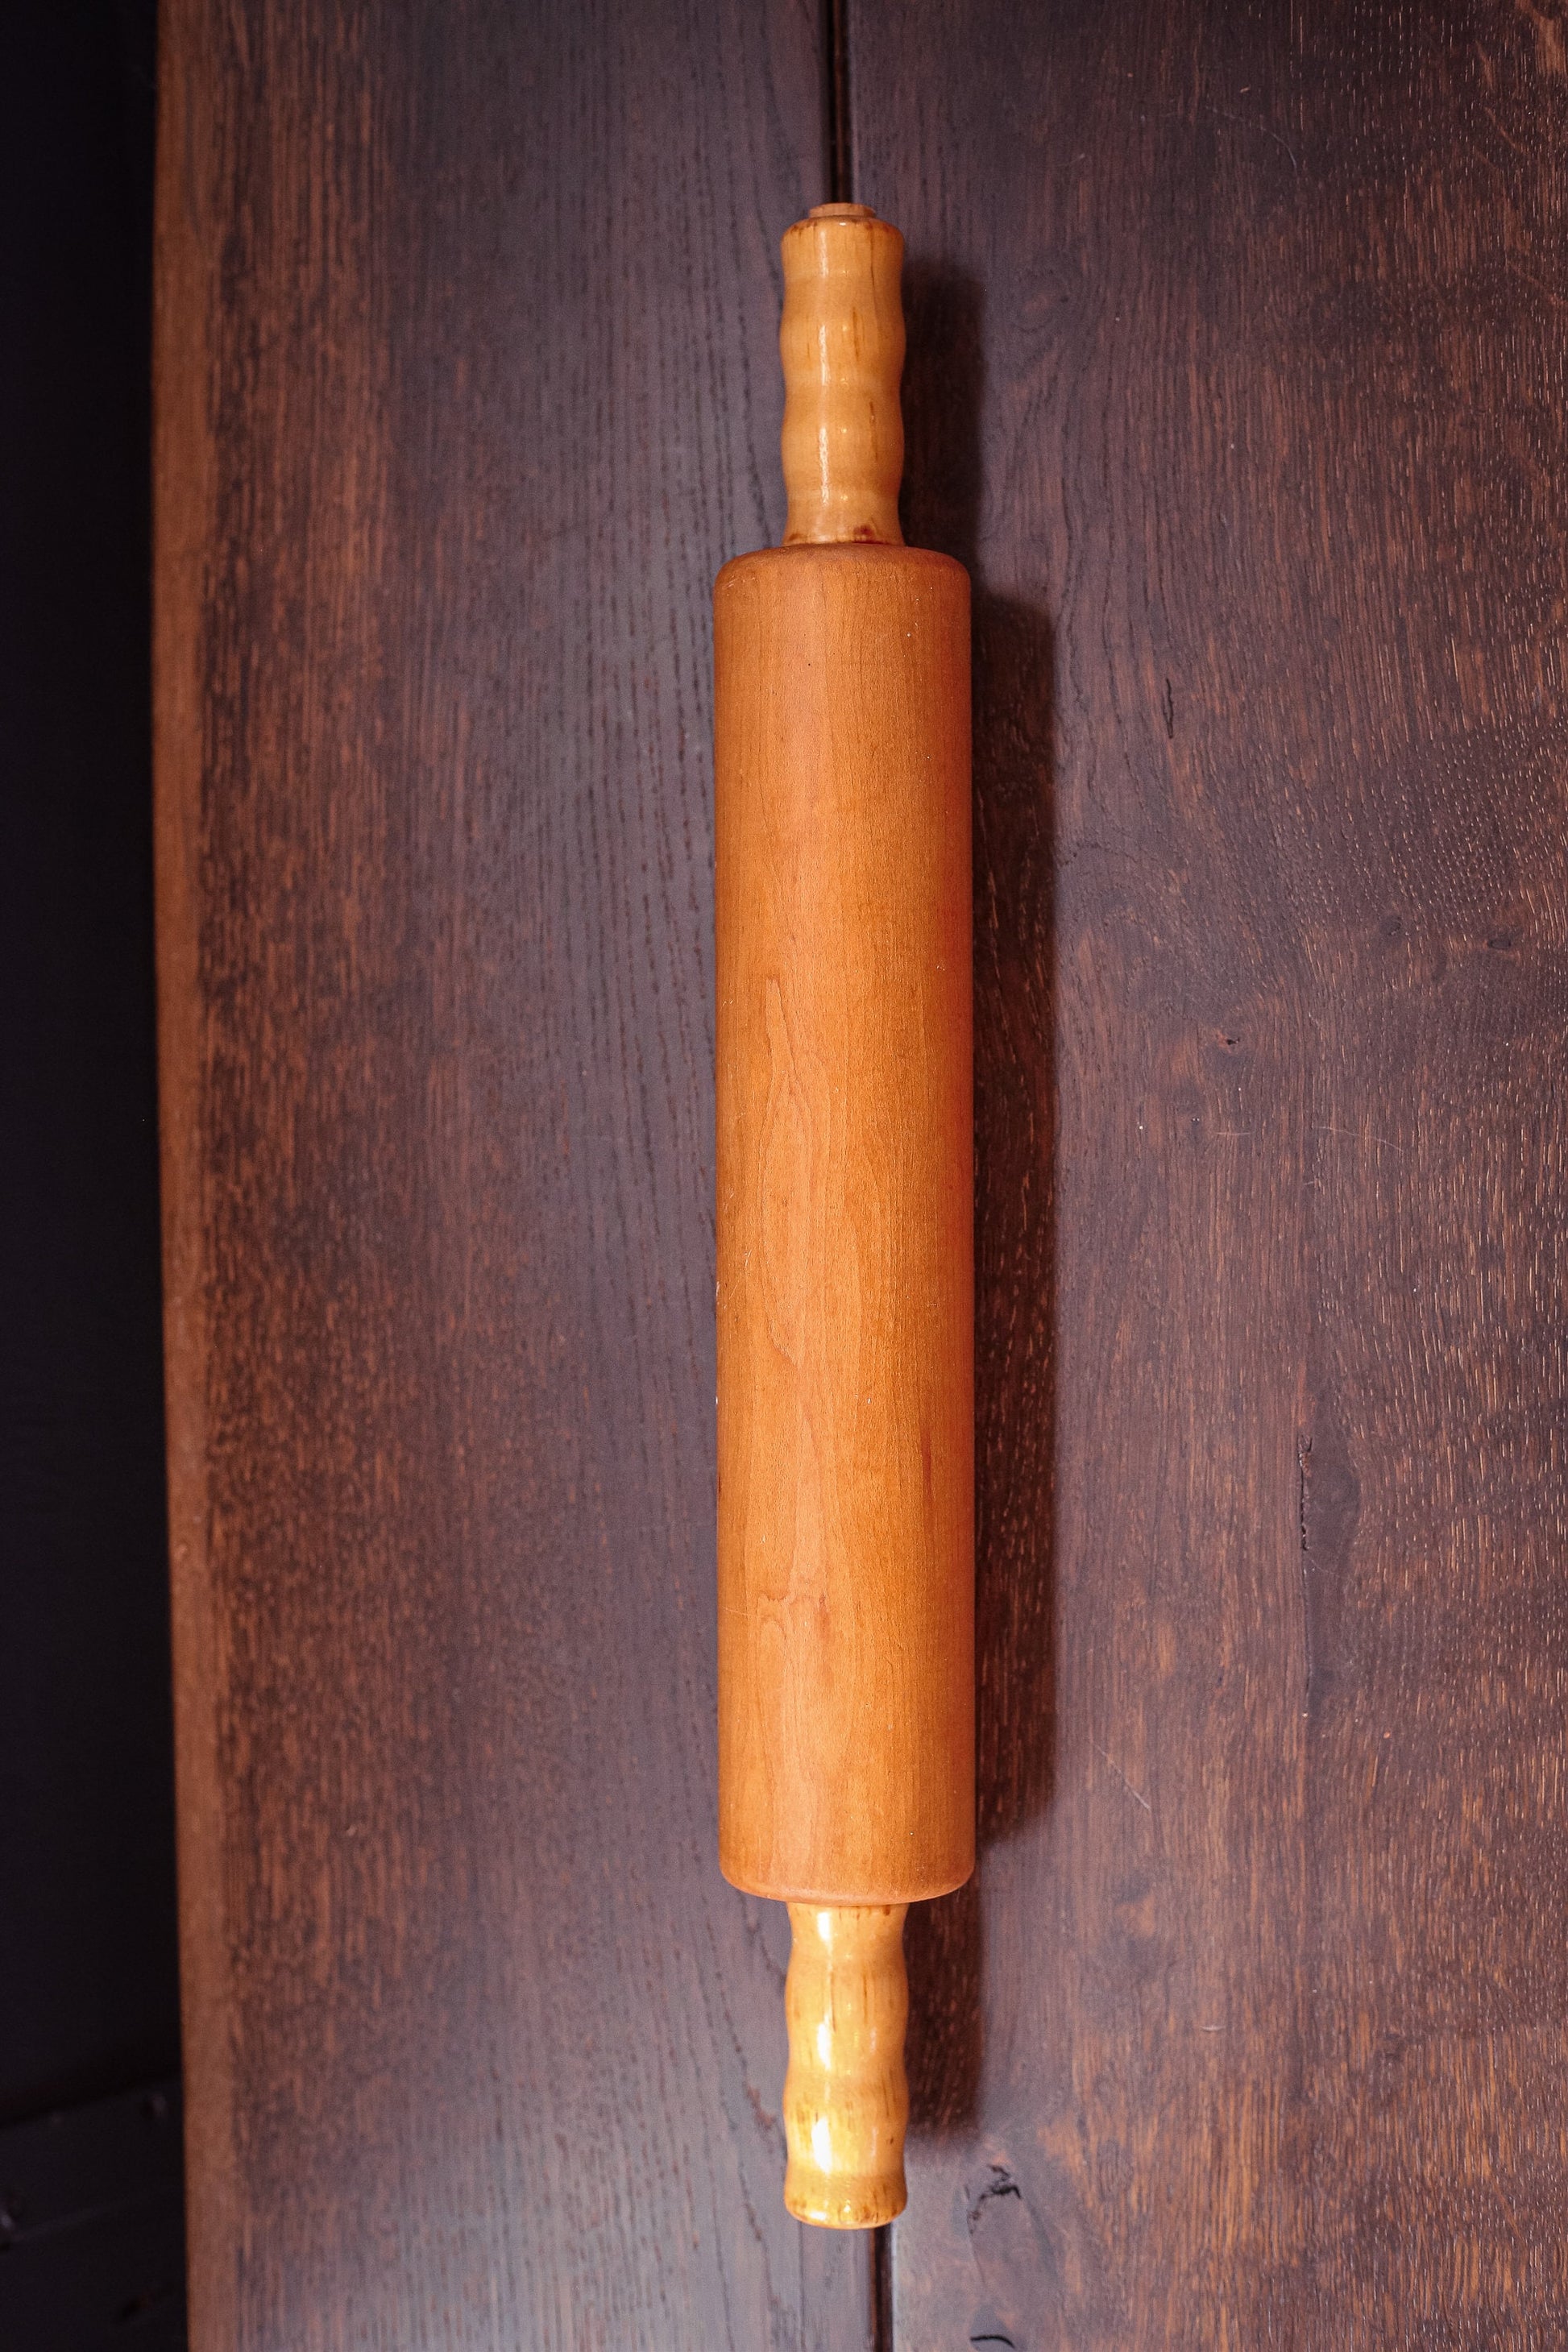 Wooden Rolling Pin - Vintage Wood Rolling Pin